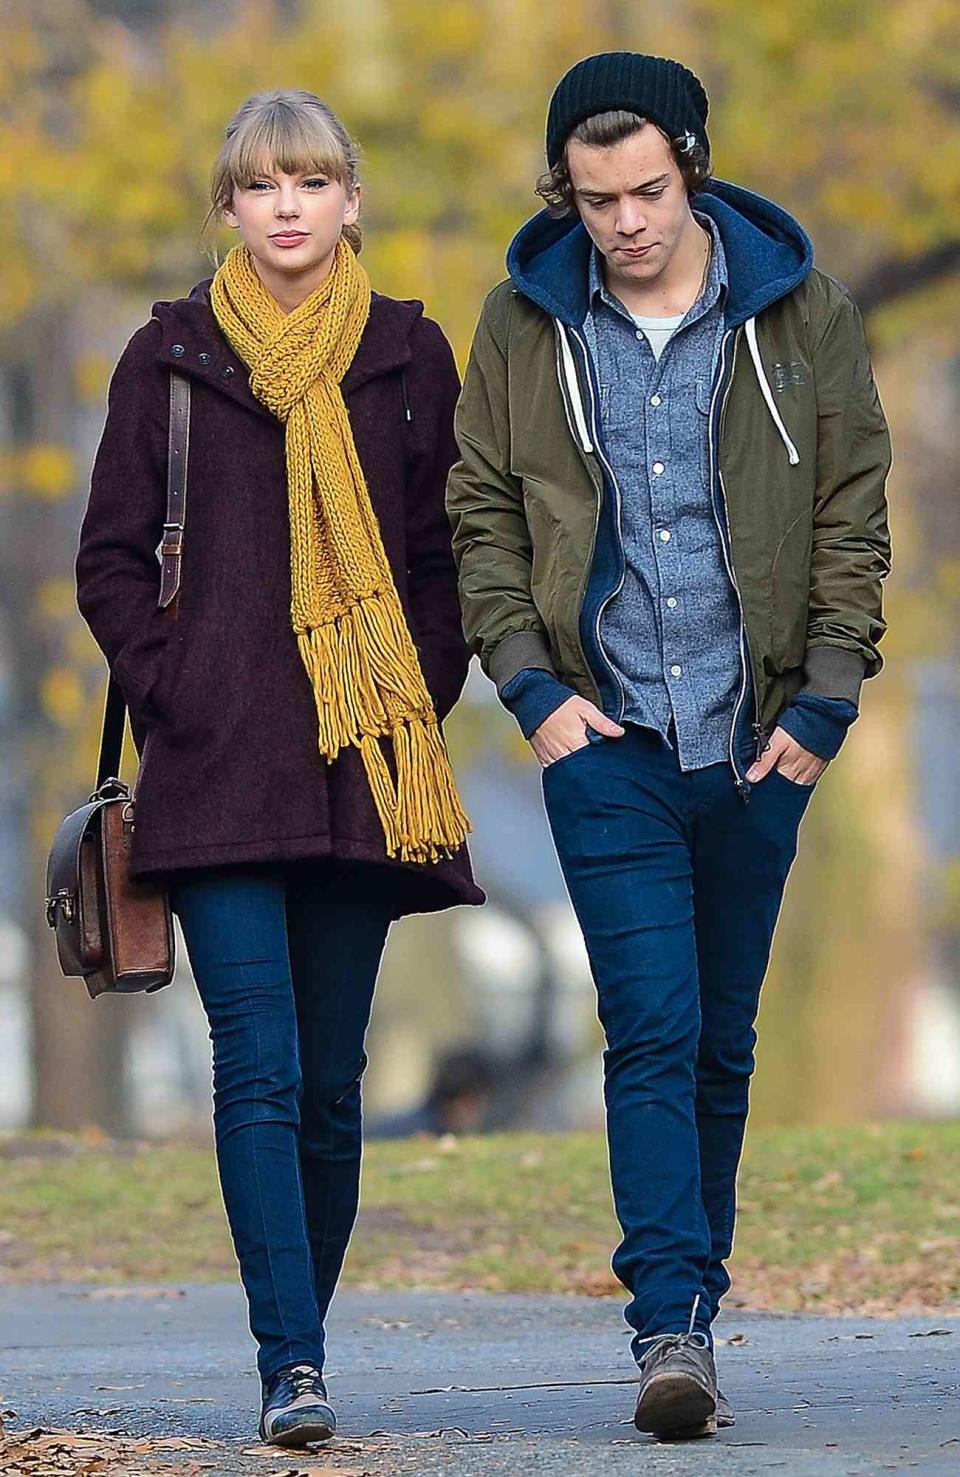 Taylor Swift and Harry Styles are seen walking around Central Park on December 02, 2012 in New York City